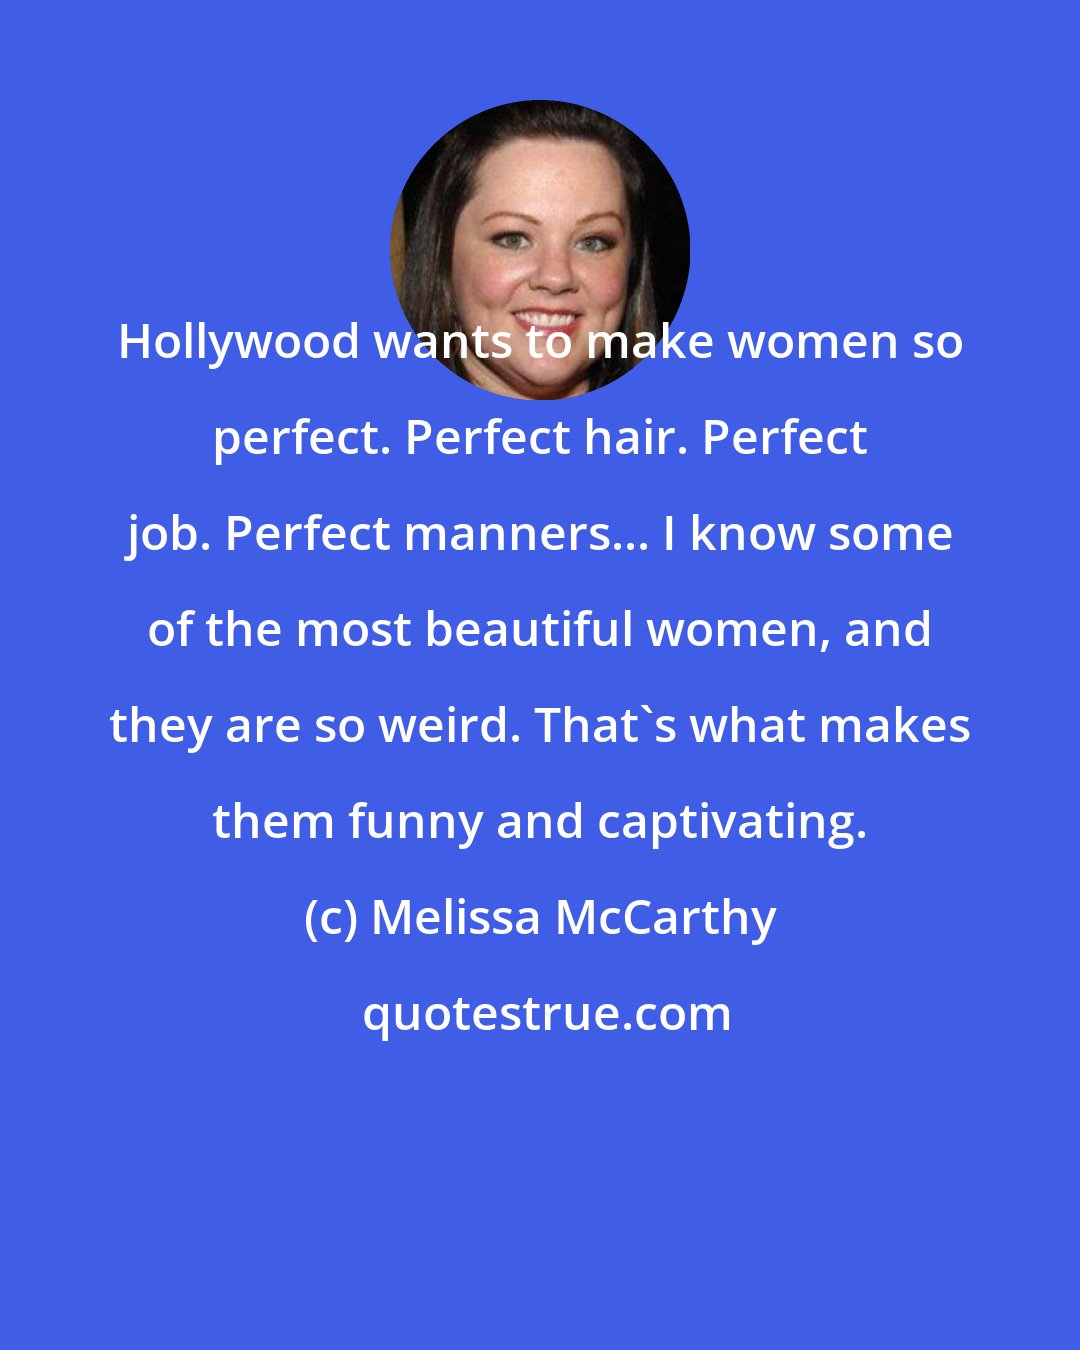 Melissa McCarthy: Hollywood wants to make women so perfect. Perfect hair. Perfect job. Perfect manners... I know some of the most beautiful women, and they are so weird. That's what makes them funny and captivating.